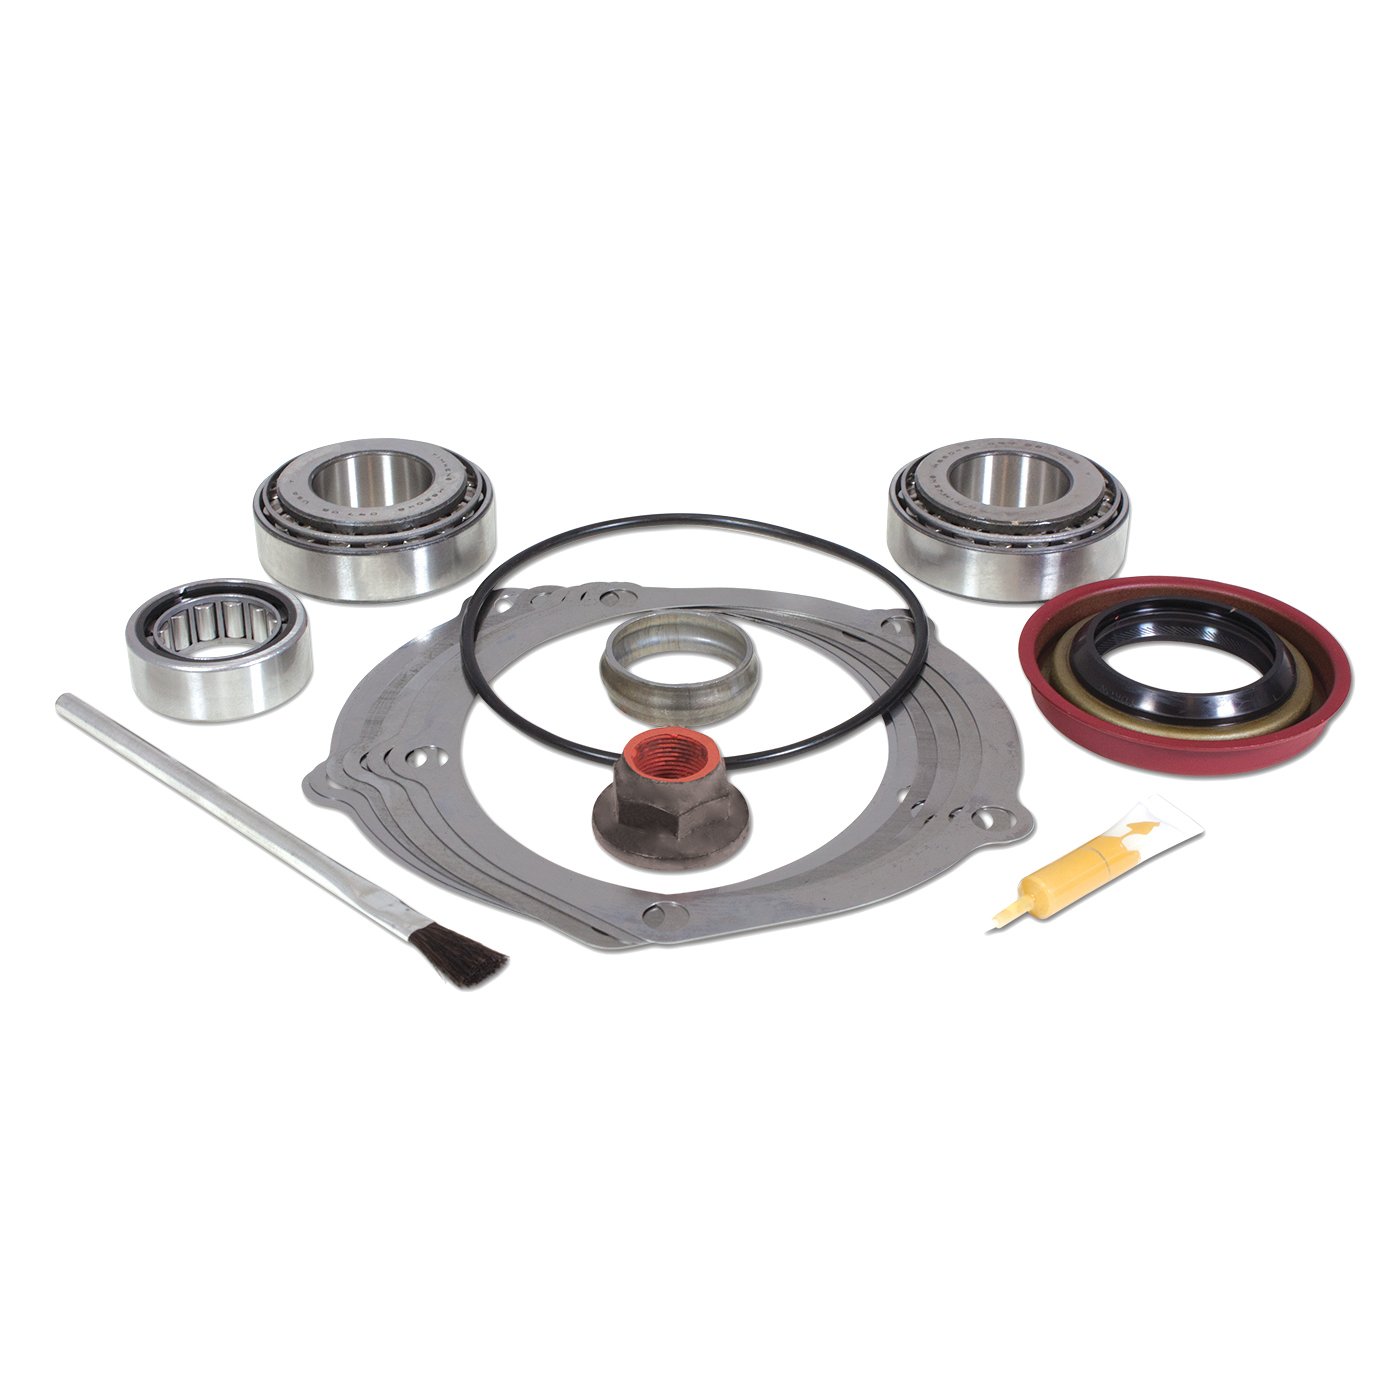 Pinion Install Kit For Ford 9 in. Differential,